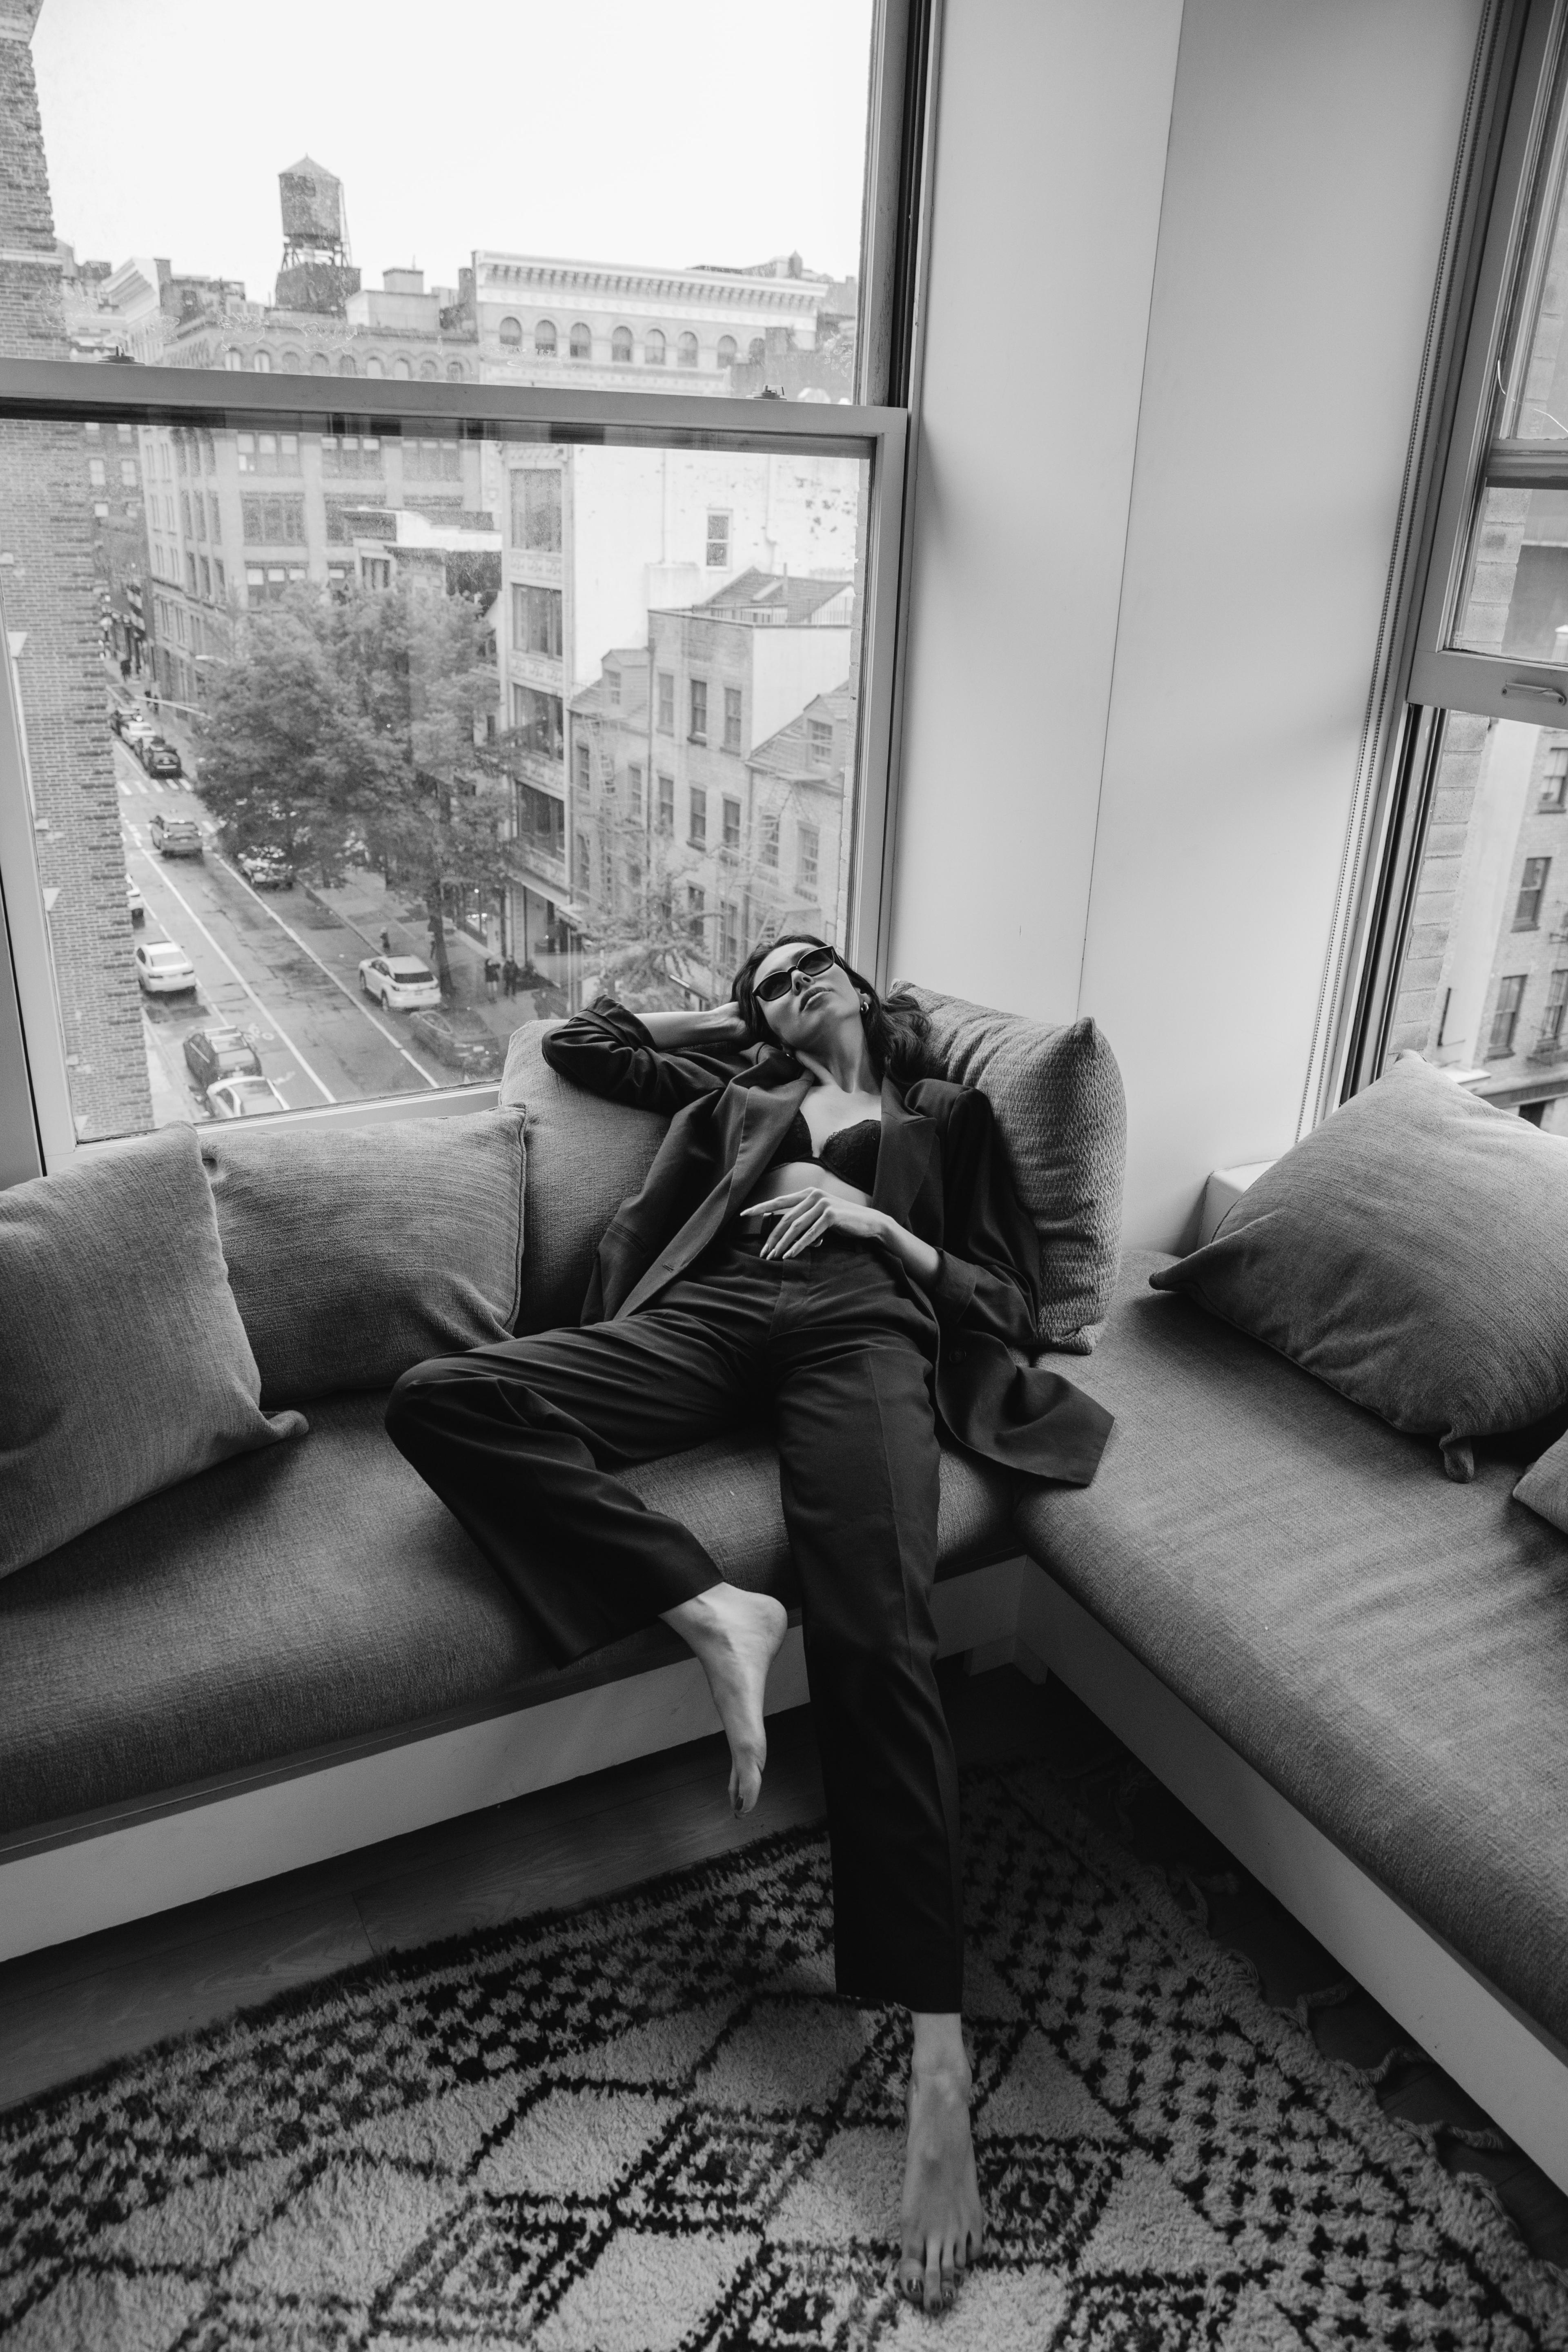 A black and white photoshoot of a person laying on a couch in front of a window.